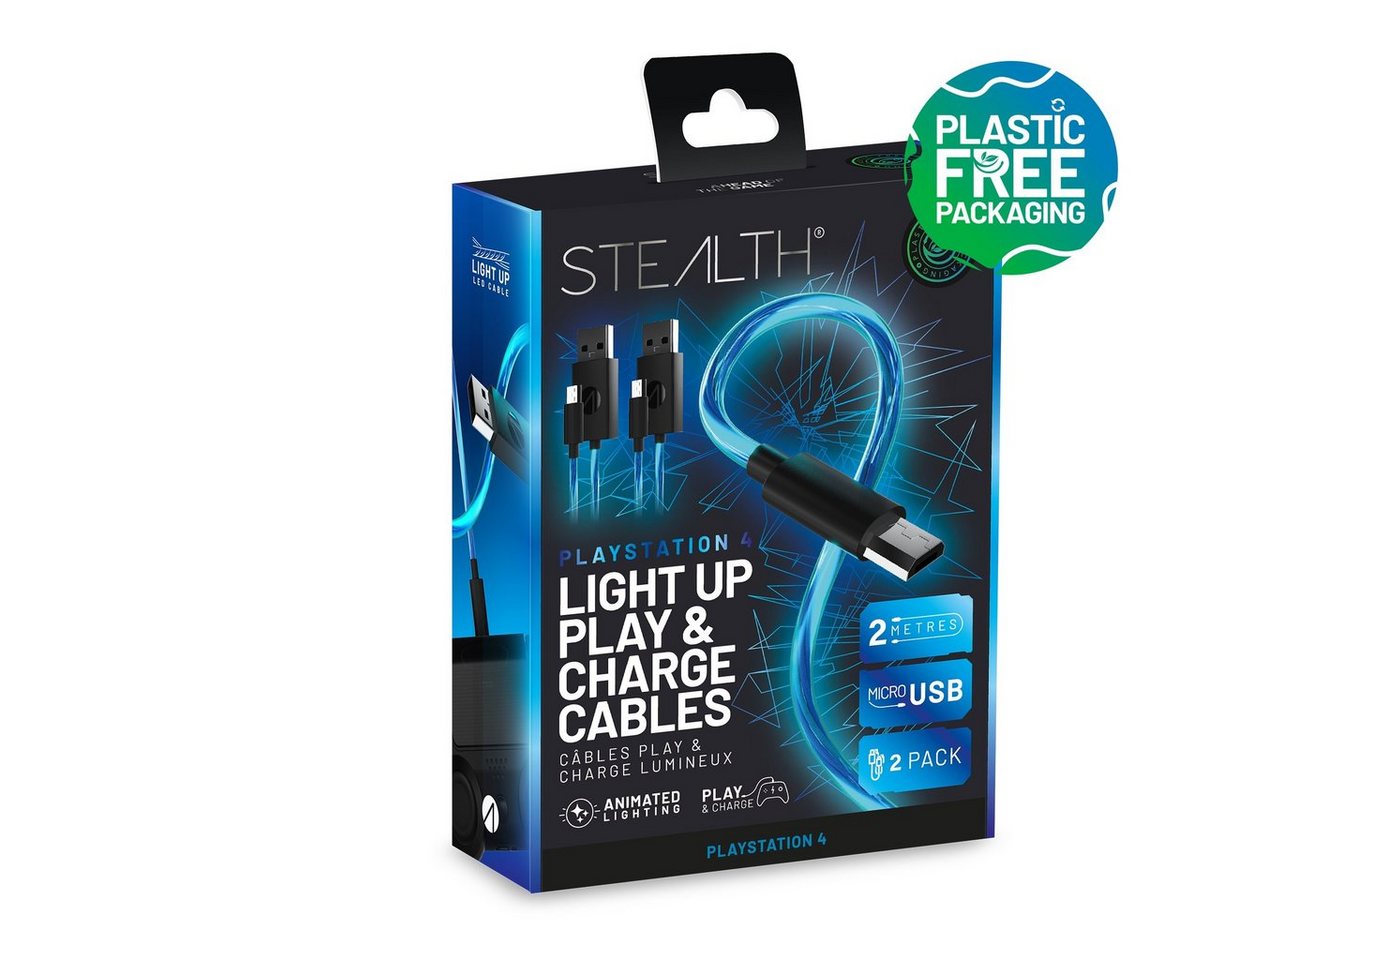 Stealth USB Kabel Doppelpack (2x 2m) Play&Charge mit LED Beleuchtung USB-Kabel, Micro-USB, (200 cm), Beleuchtung von Stealth